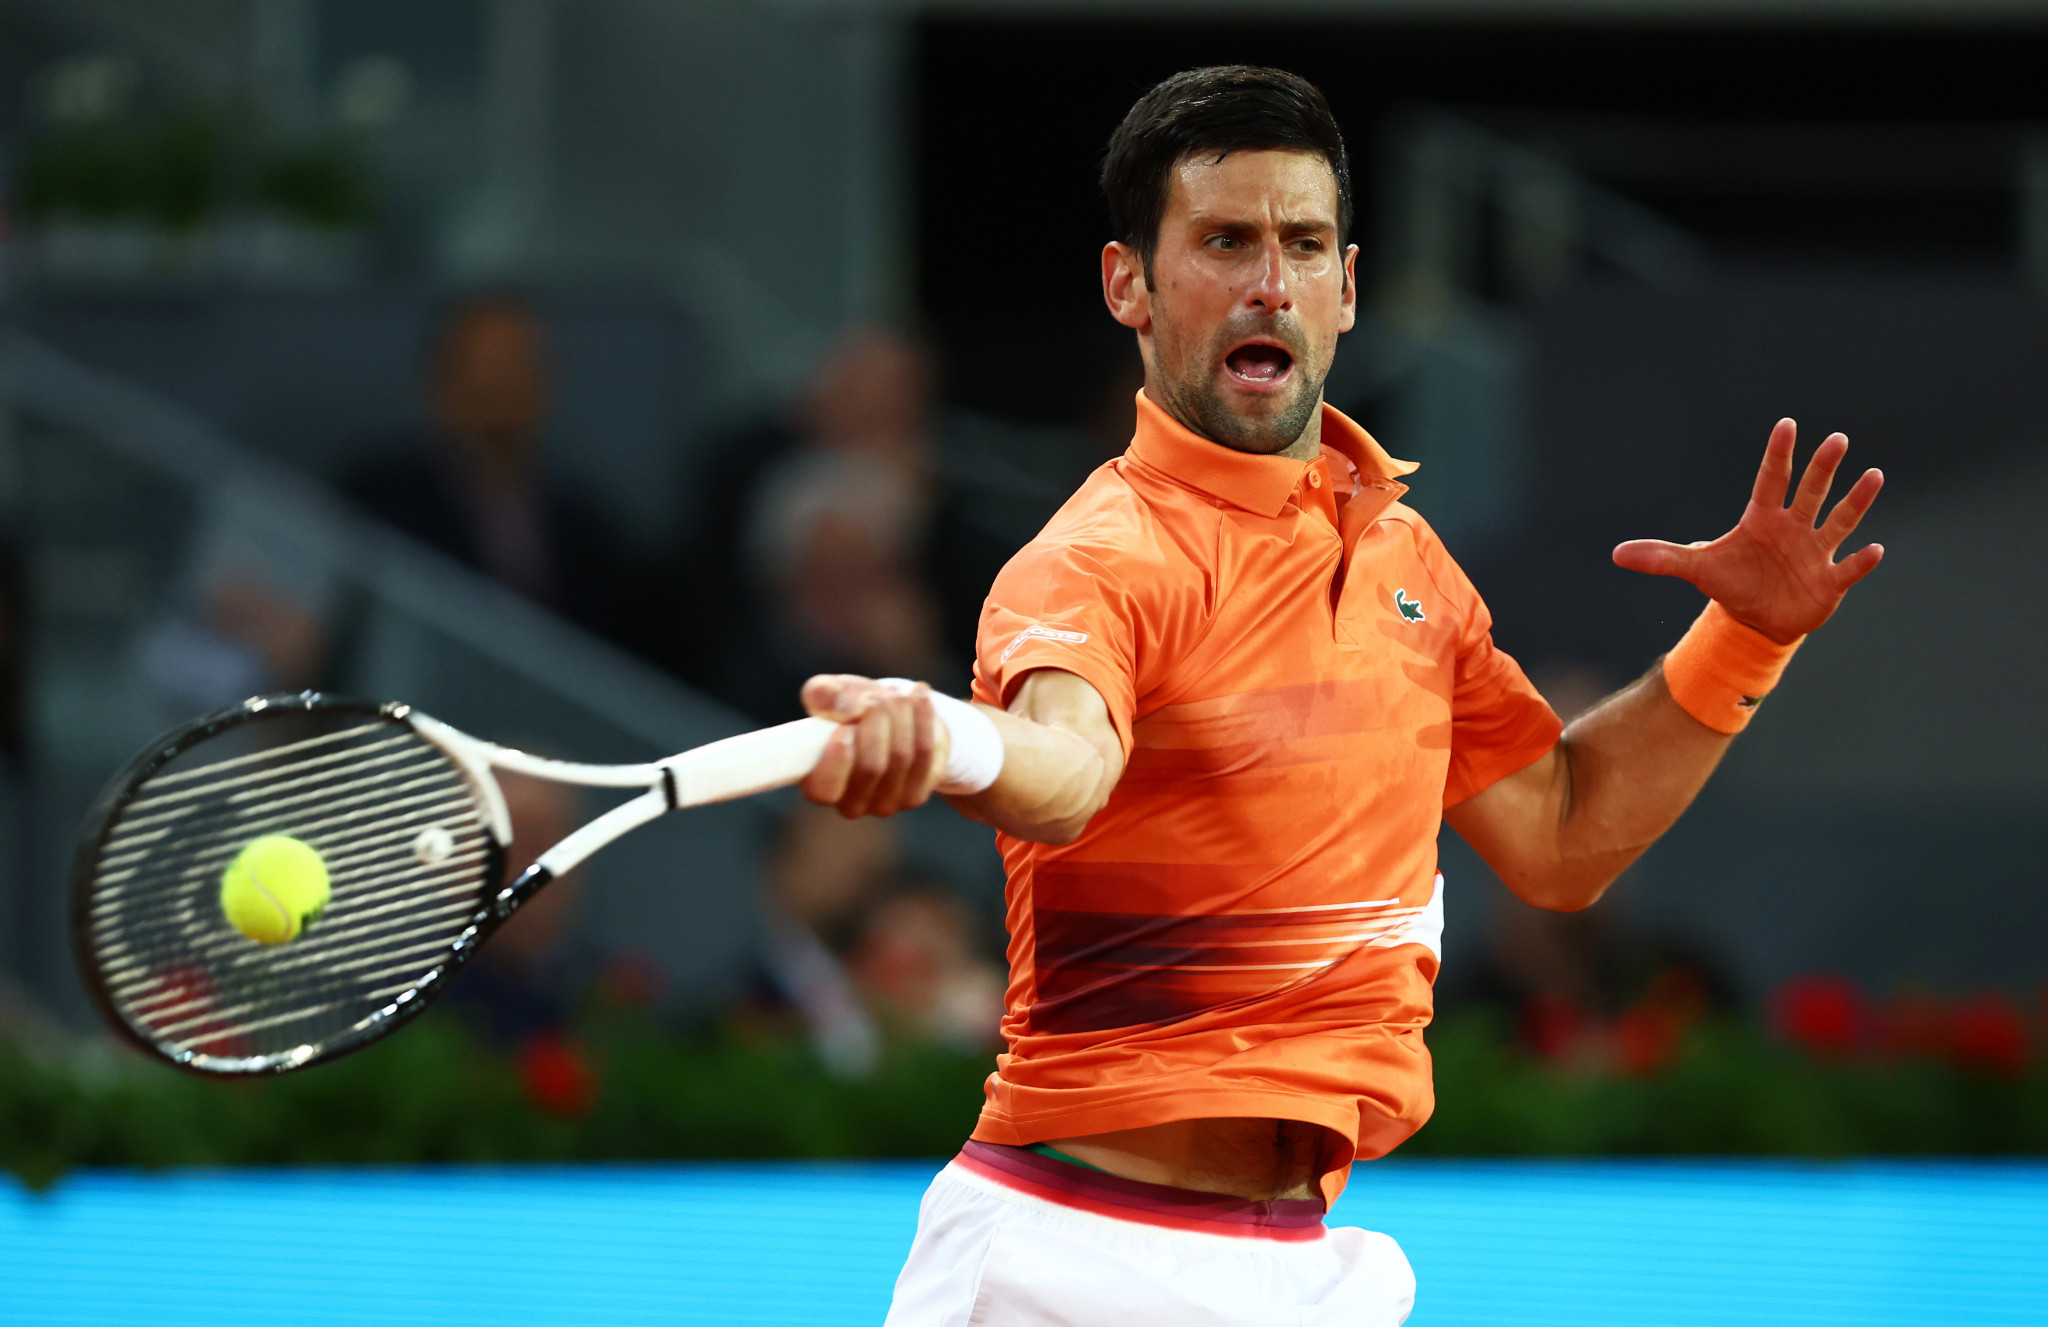 Men's top seed Djokovic triumphs on of mixed fortunes for Brits in Madrid